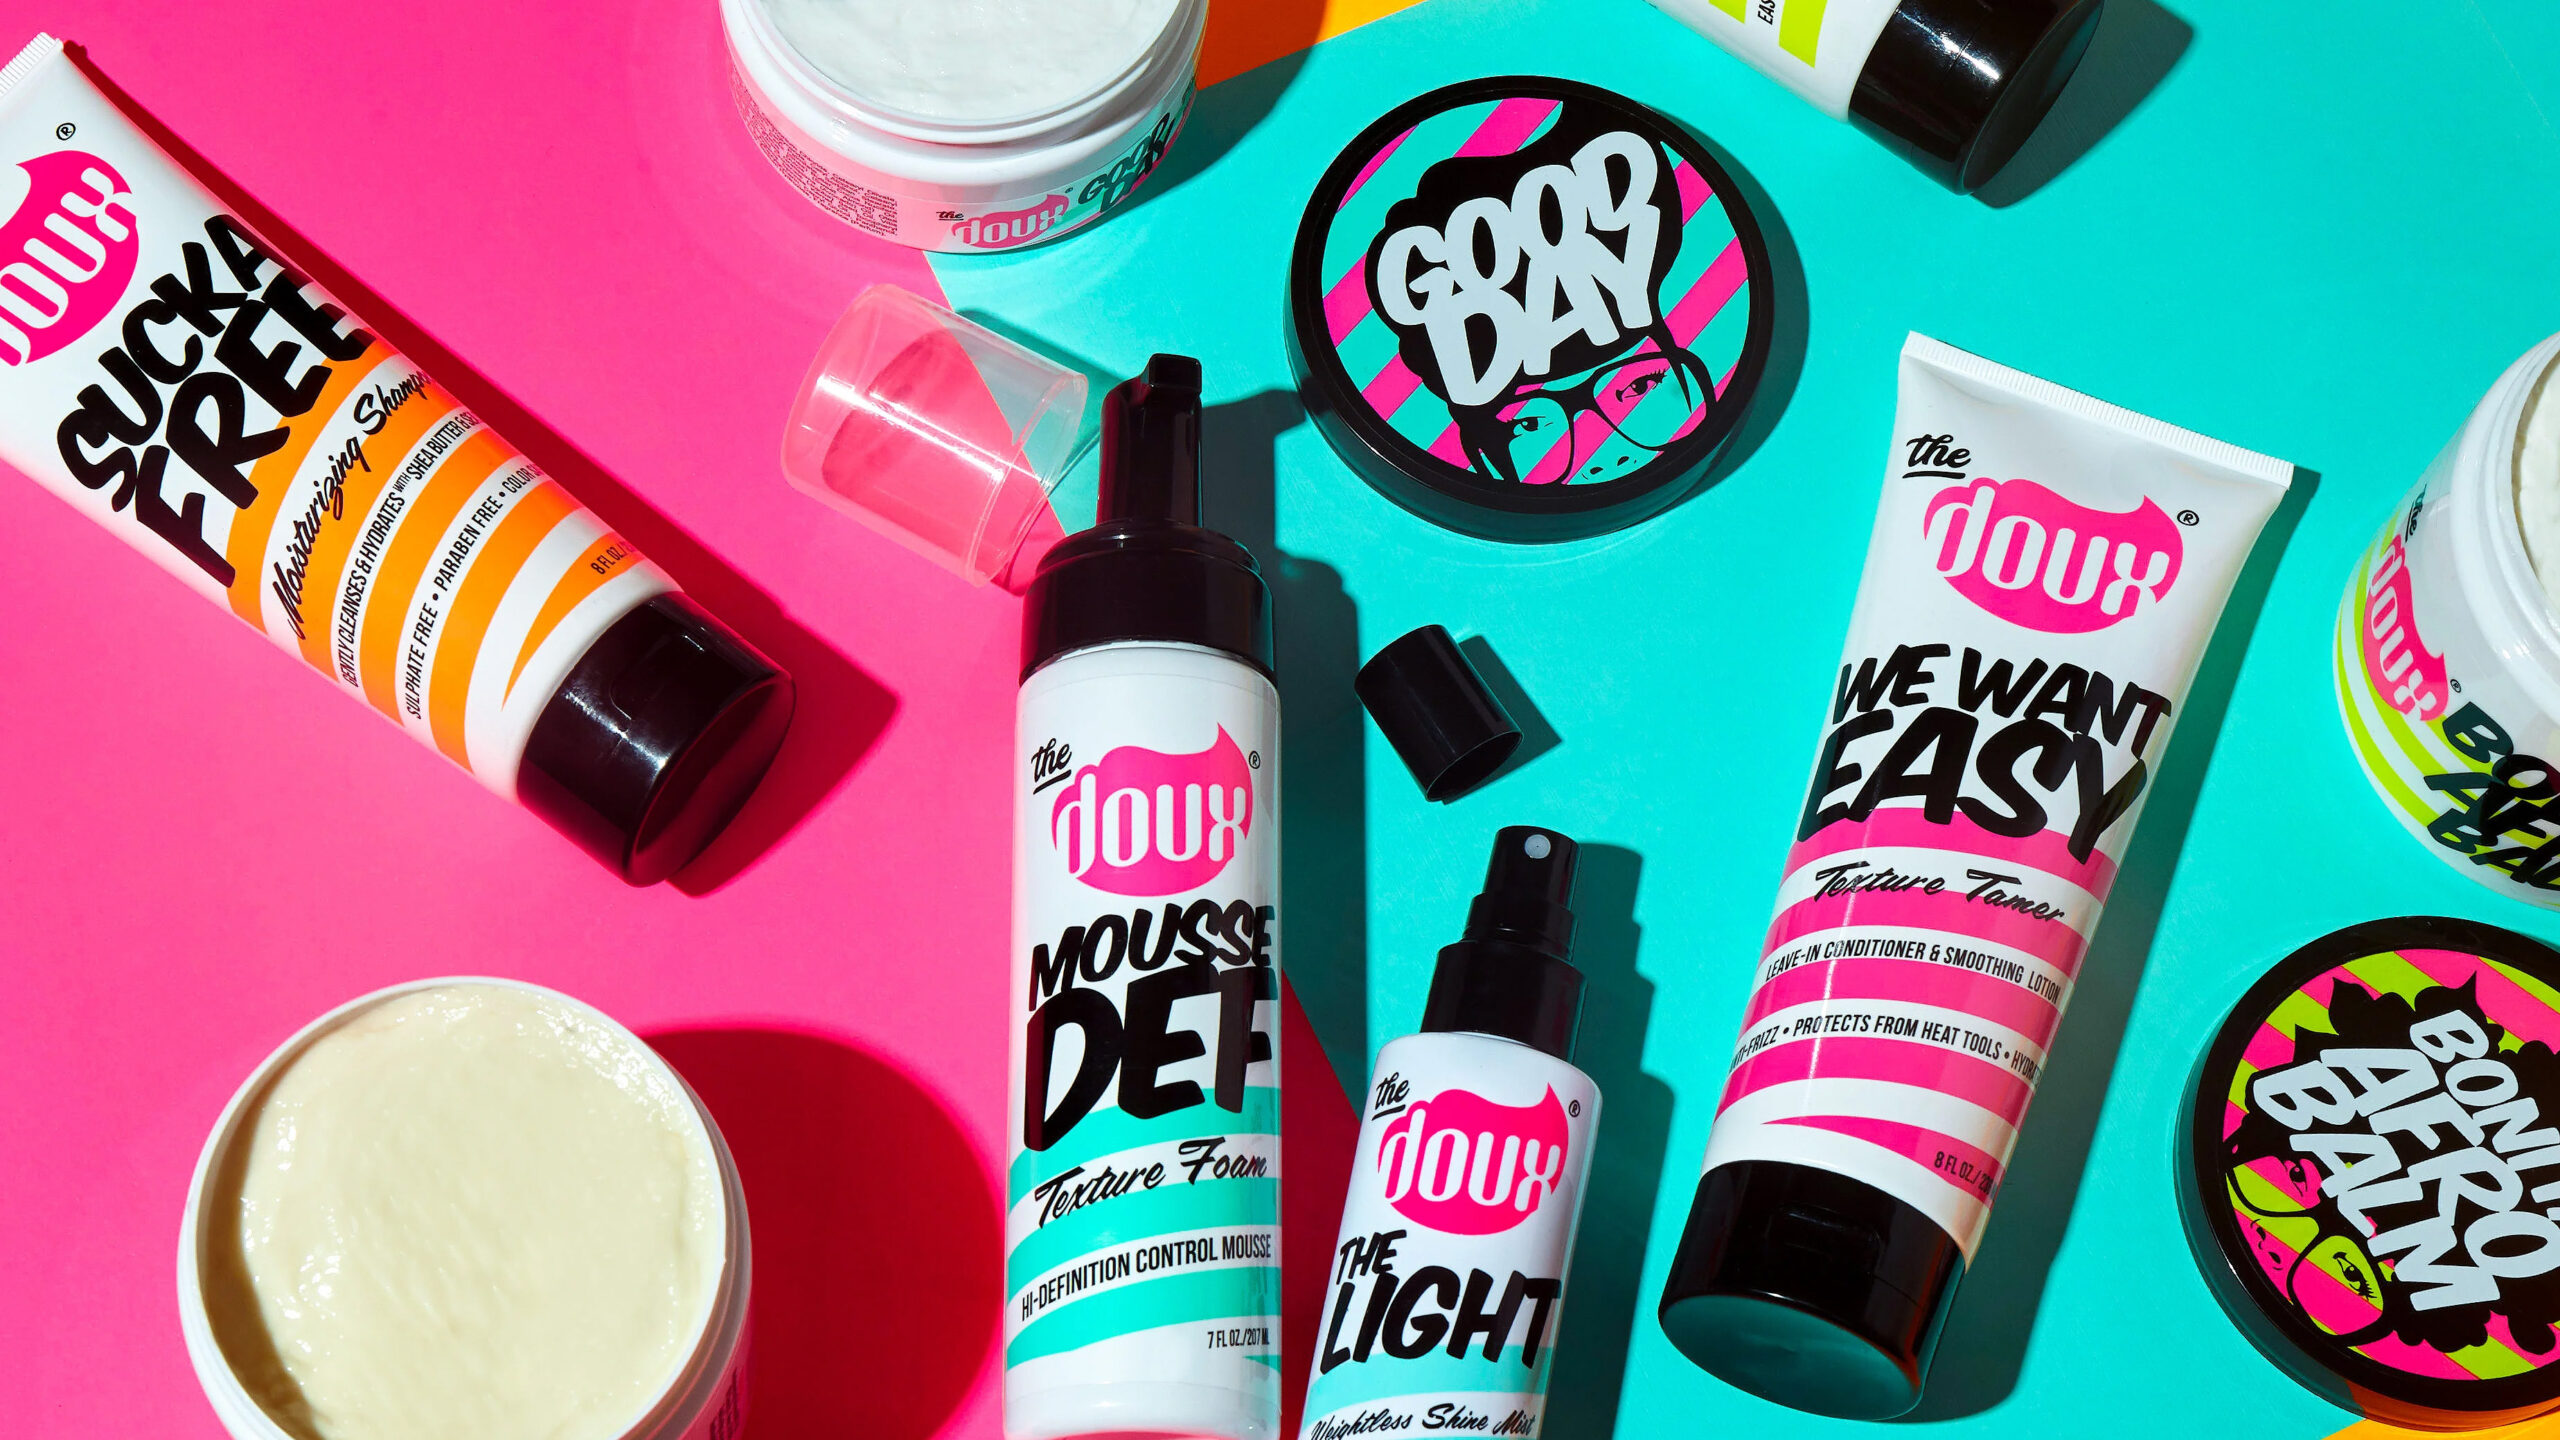 The Doux products laid out on a colorful background